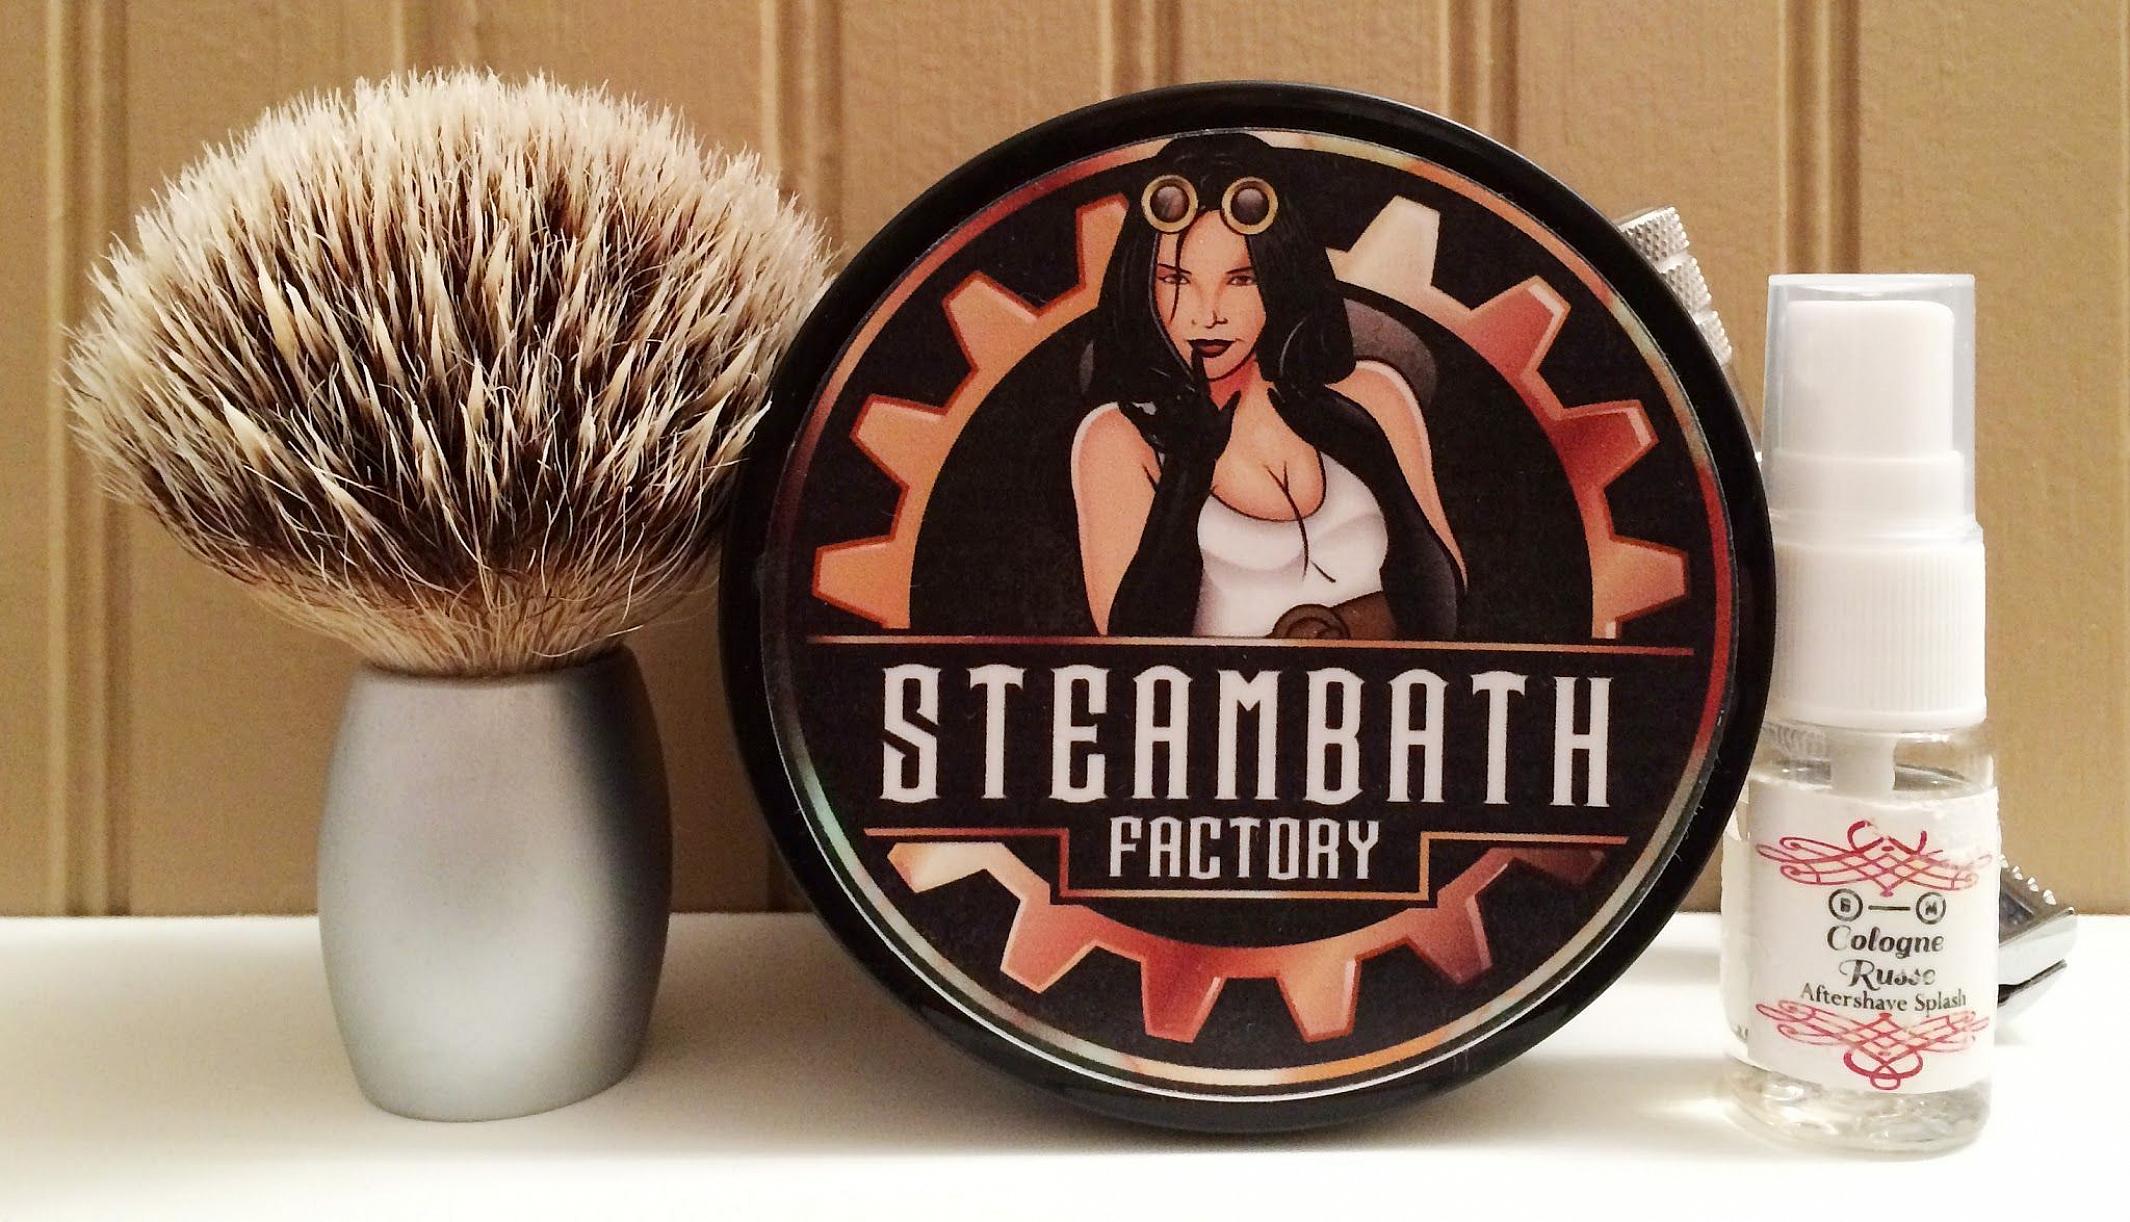 Steambath Factory & Barrister and Mann